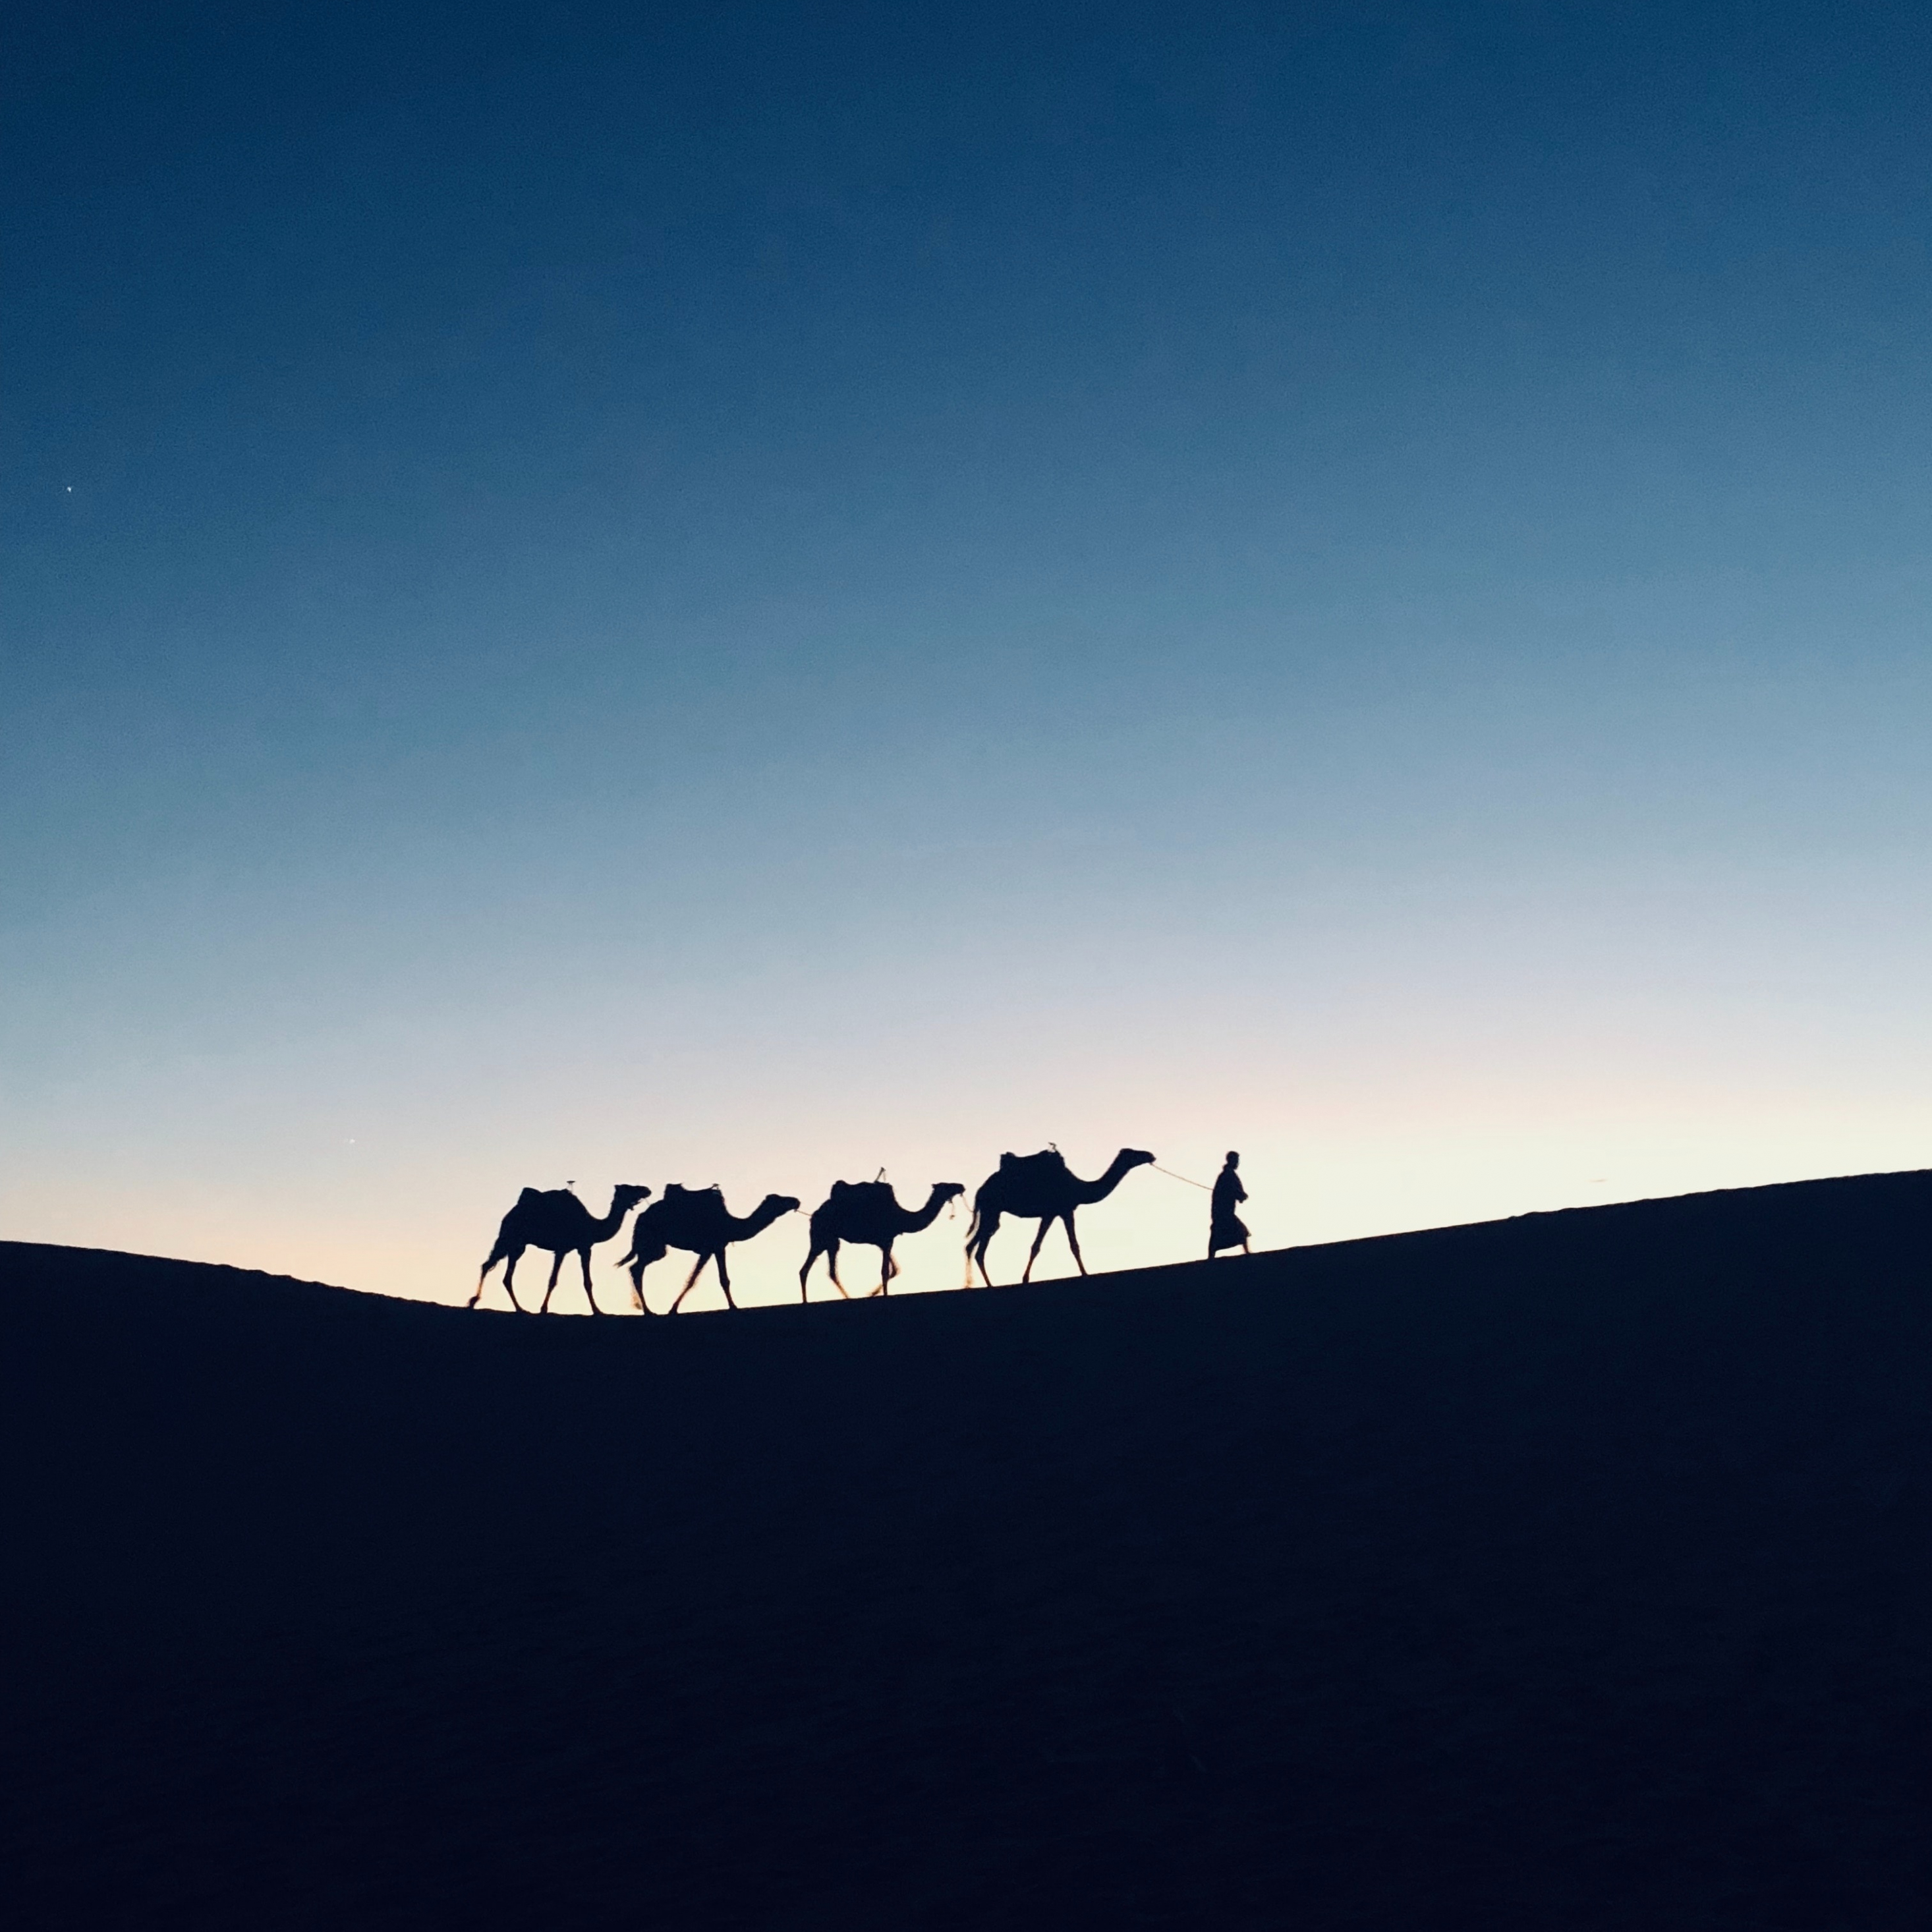 Silhouette, sunset, camel, Morocco, 2932x2932 wallpaper